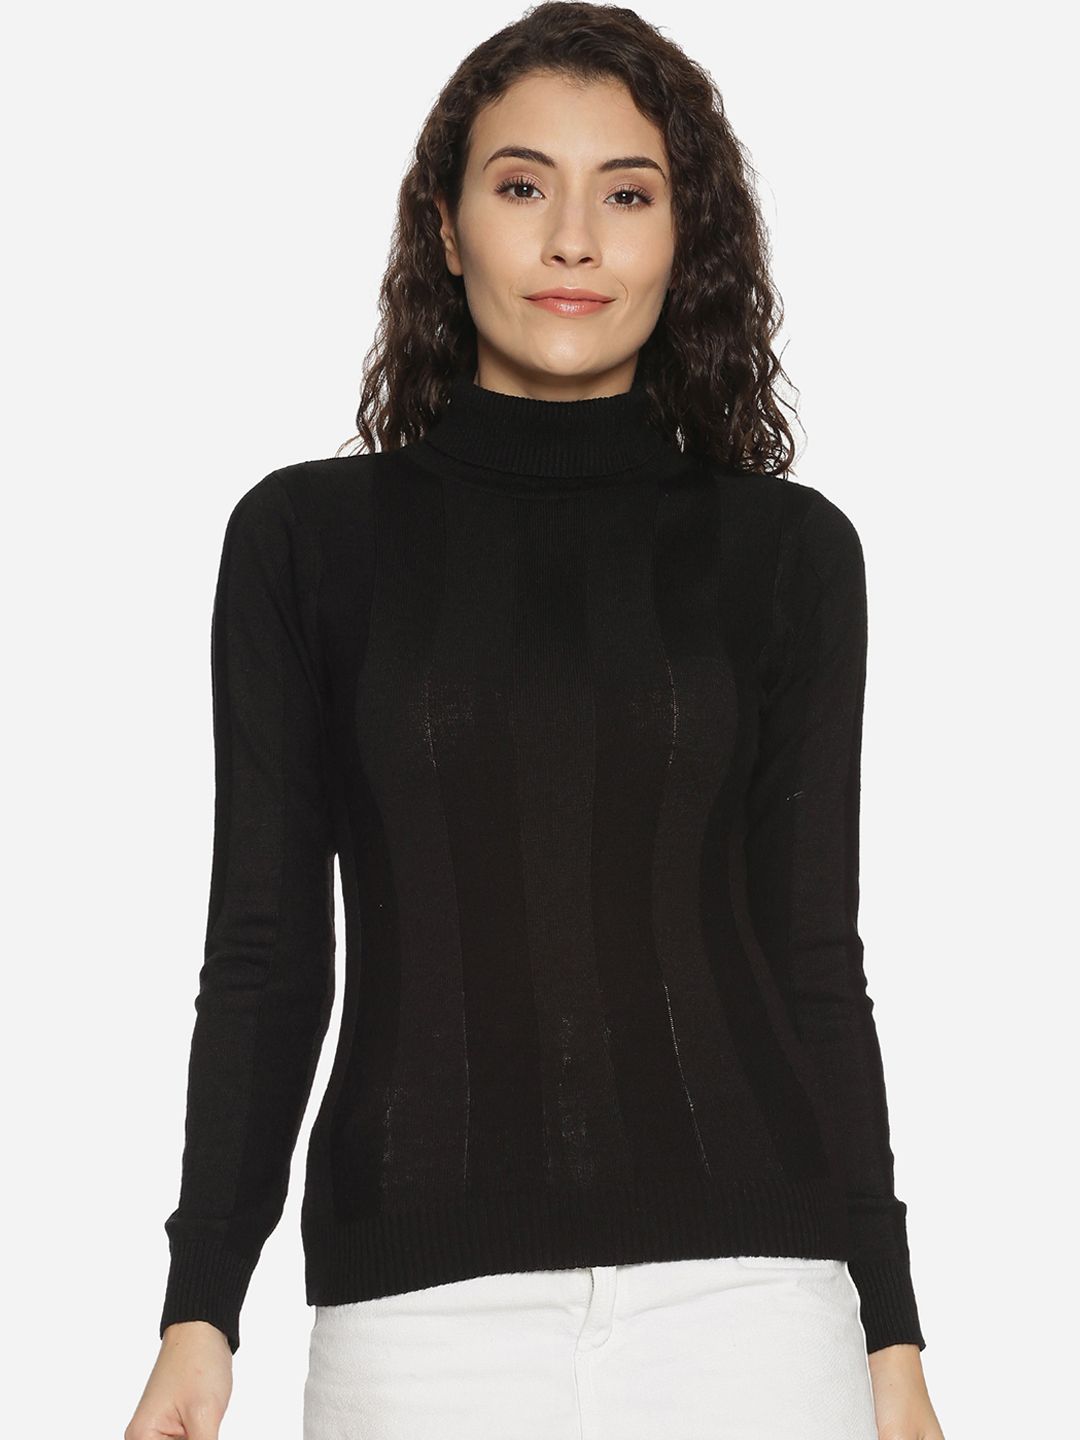 BEVERLY BLUES Women Black Self Design Pullover Sweater Price in India